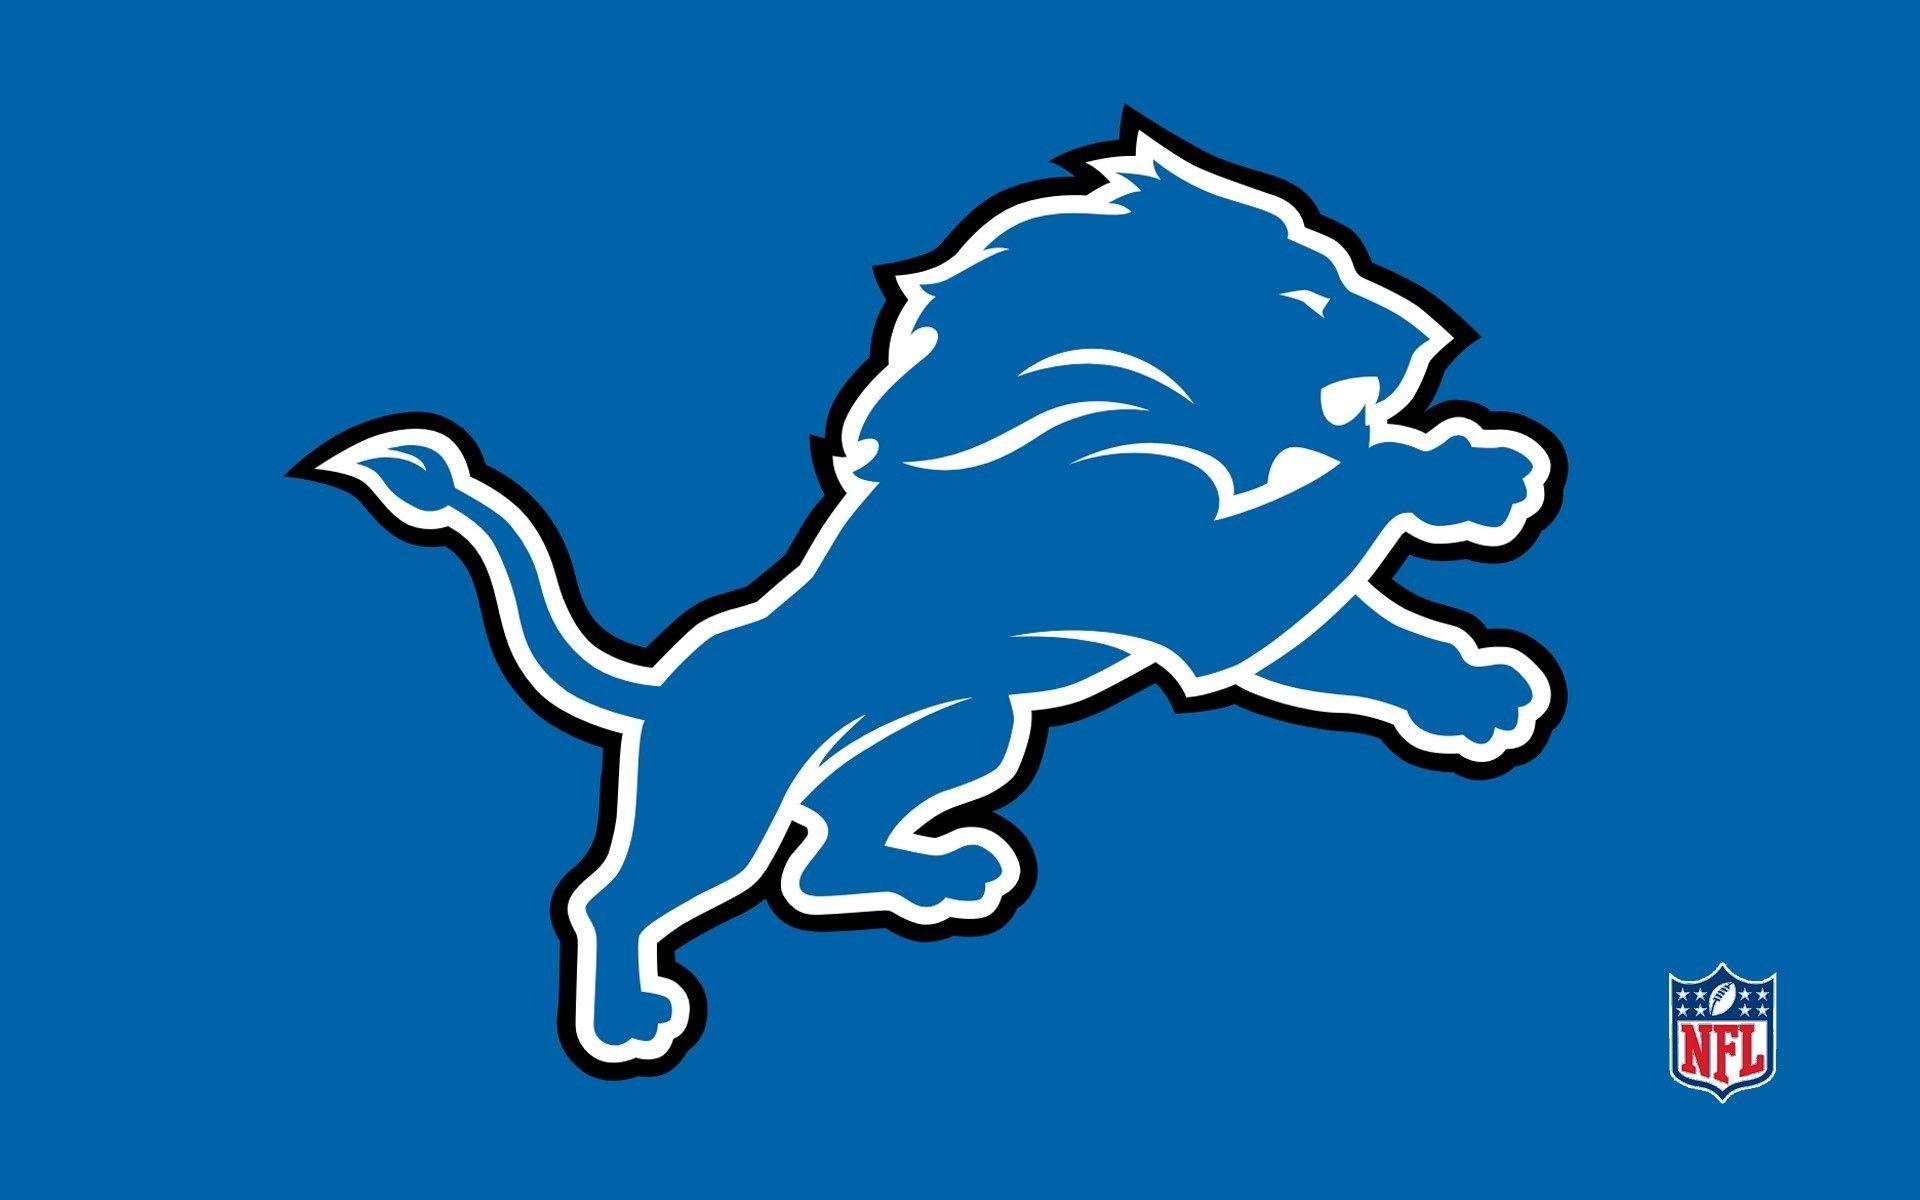 Detroit Lions New Logo Wallpapers Top Free Detroit Lions New Logo